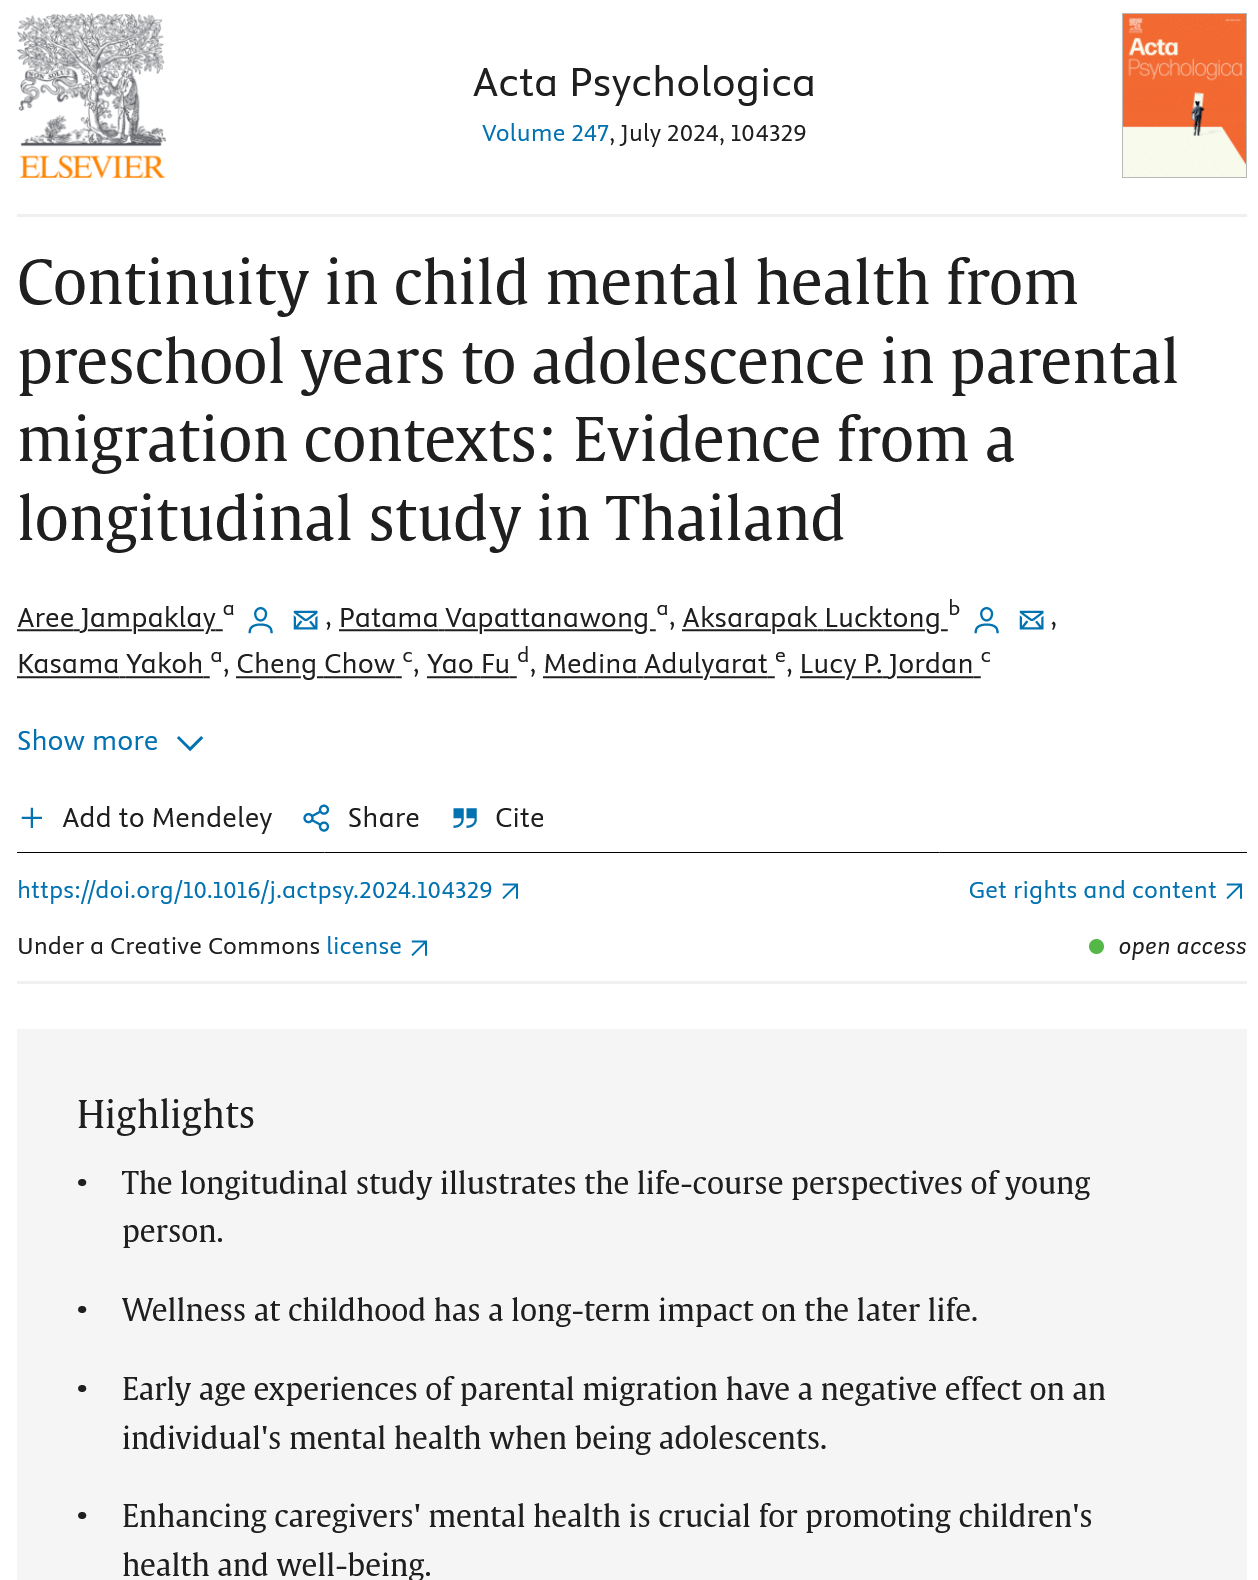 Continuity in child mental health from preschool years to adolescence in parental migration contexts: Evidence from a longitudinal study in Thailand